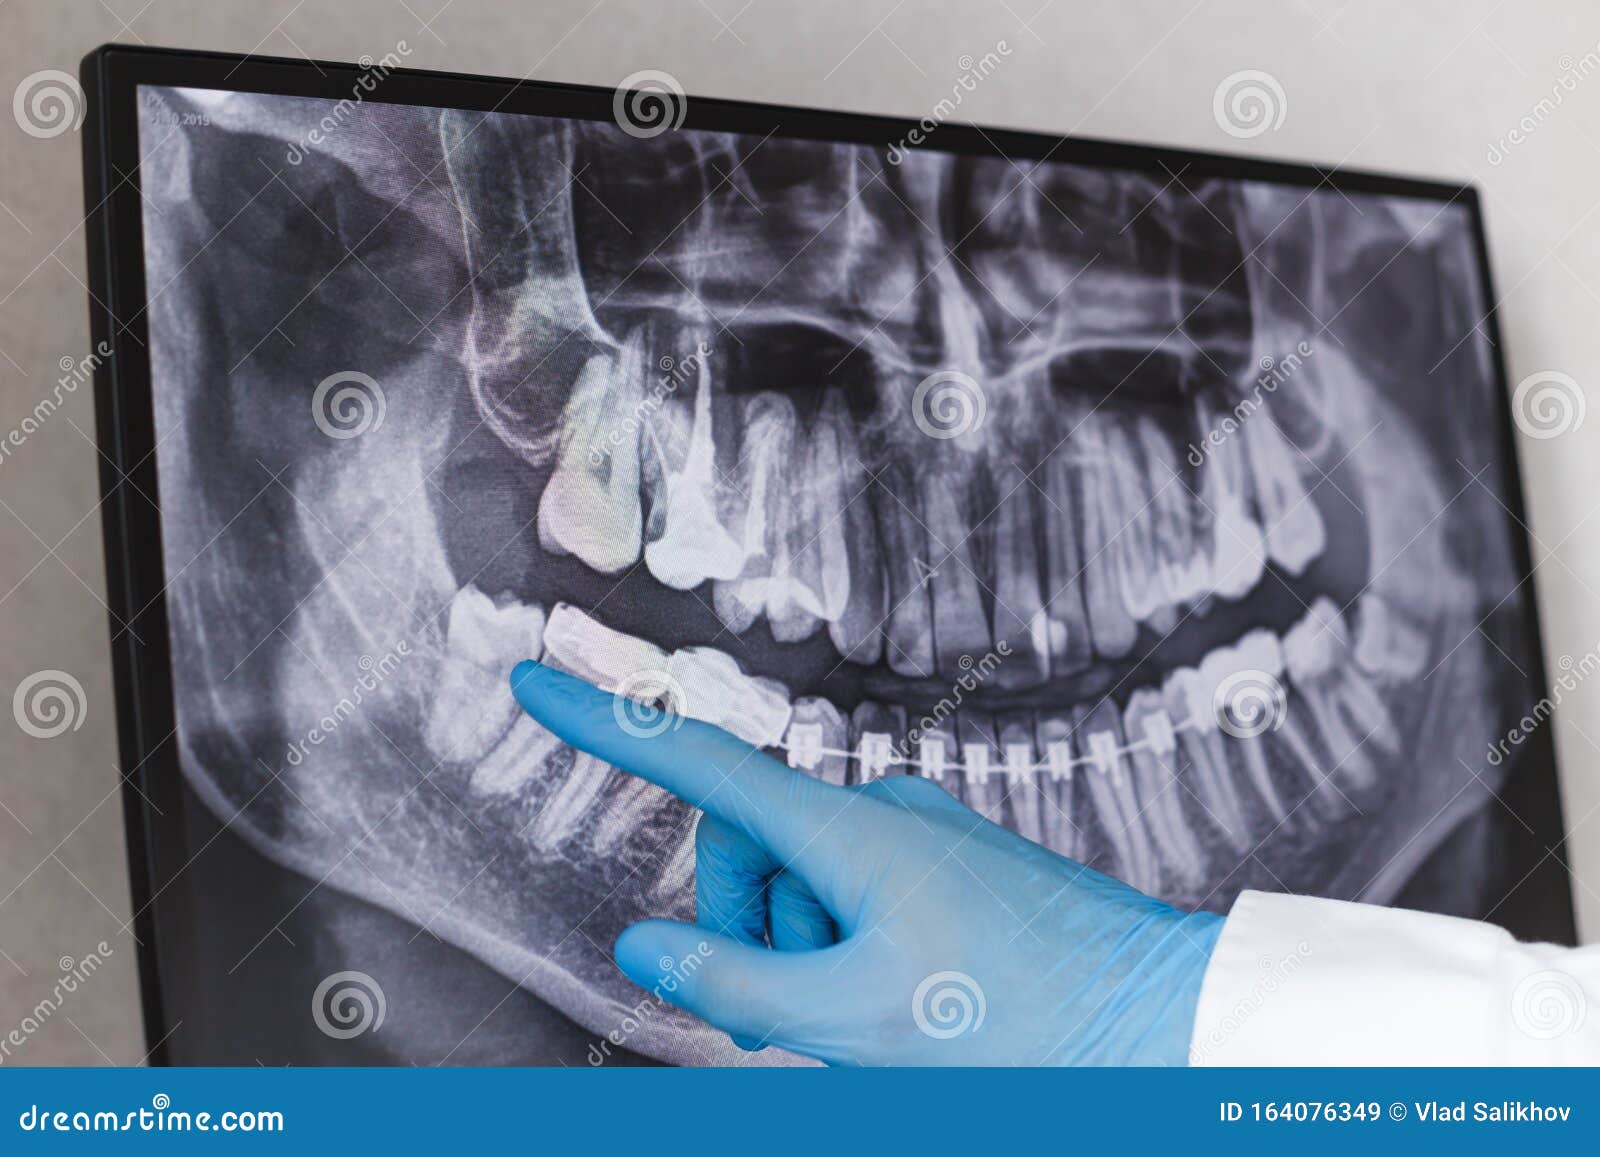 Wisdom Tooth Background Images, HD Pictures and Wallpaper For Free